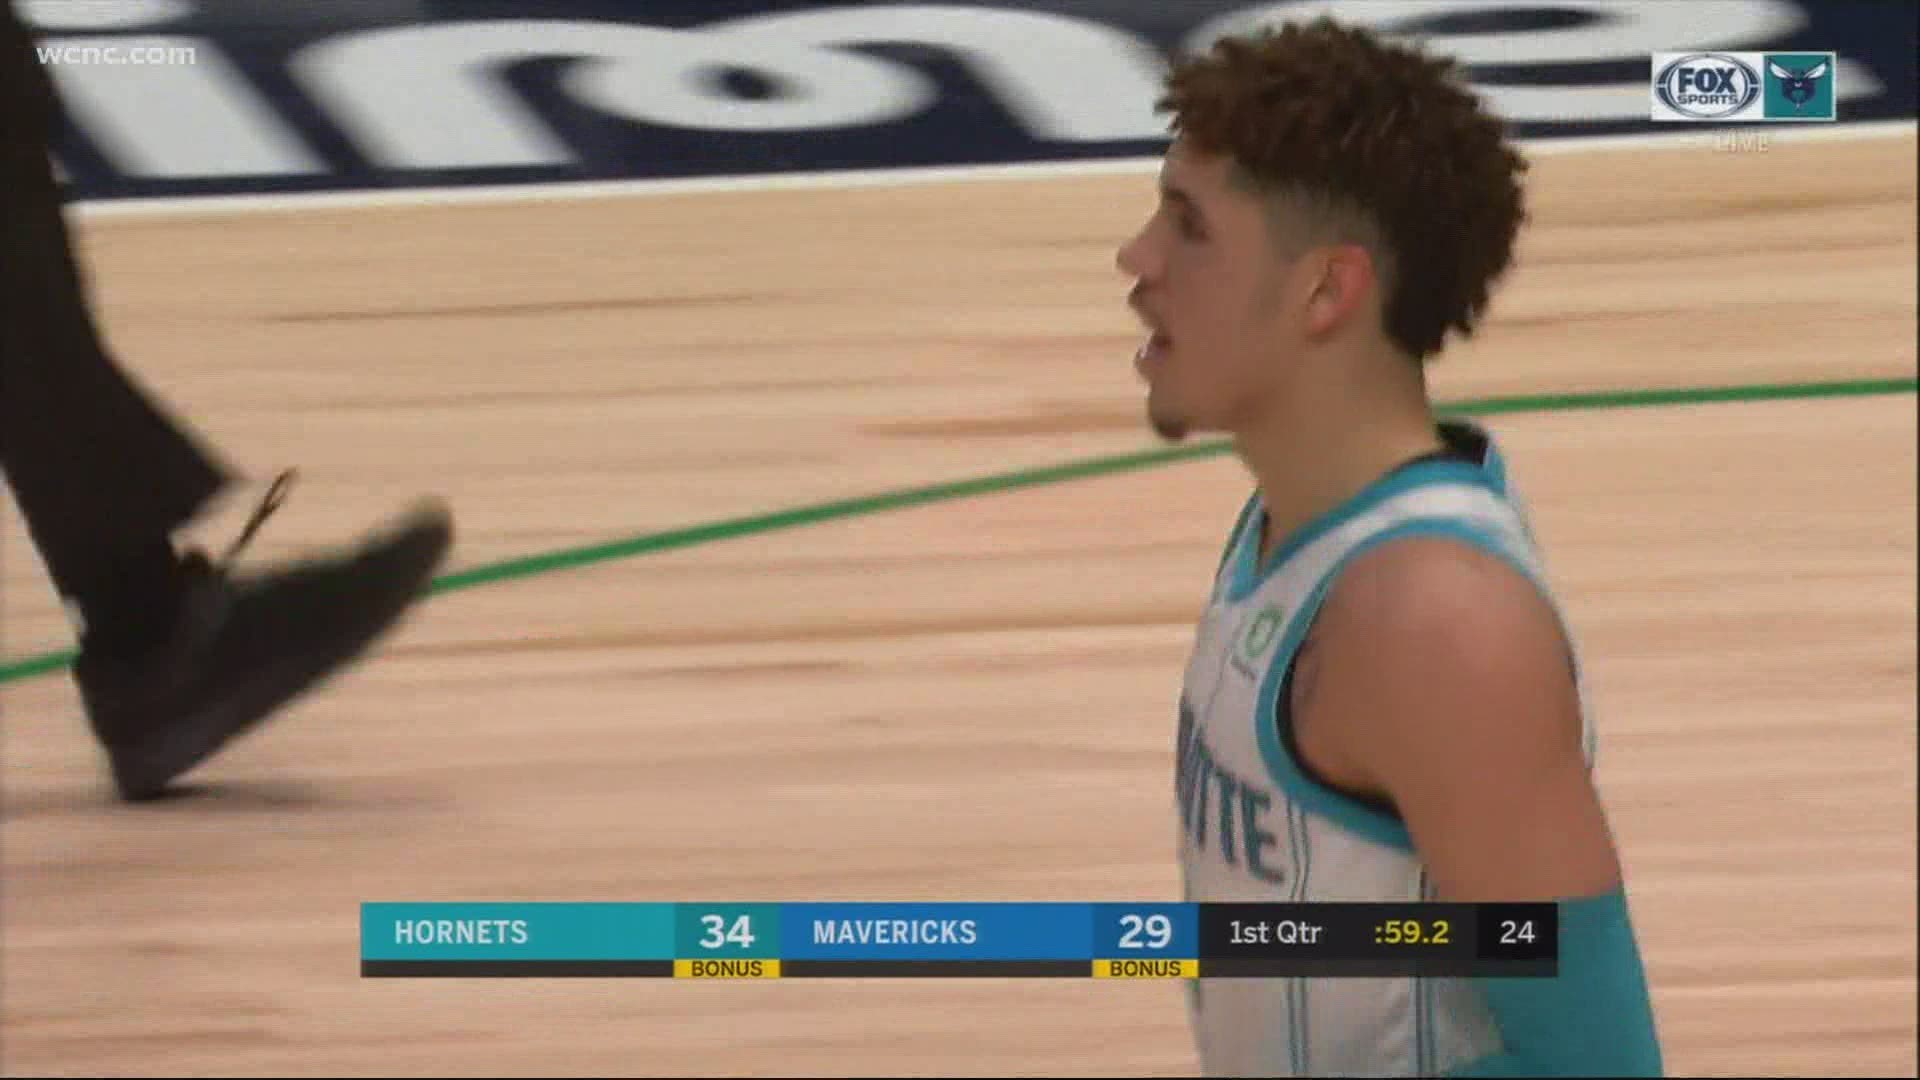 LaMelo Ball scored 22 points, Miles Bridges had 20 points and 16 rebounds and the Charlotte Hornets blew out Dallas 118-99 in the Mavericks’ home opener.